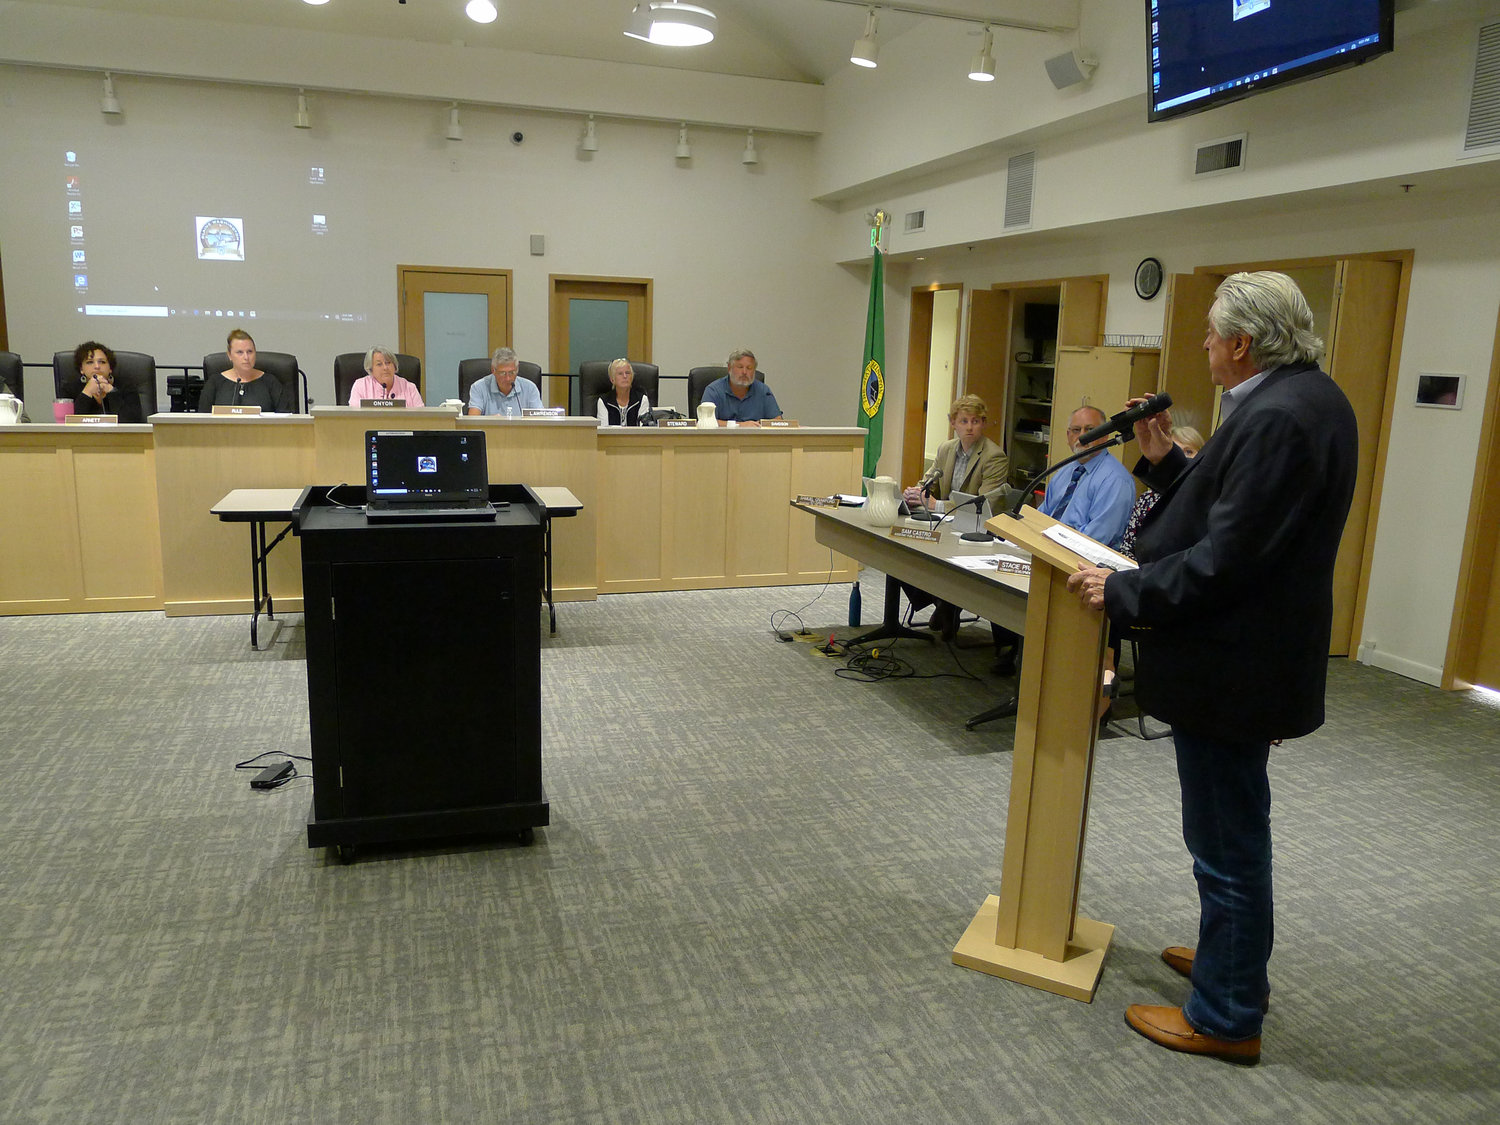 At the September 9, 2019 city council meeting, H. Larry Leasure, chairman of the White-Leasure Development Company, discussed his company's proposal to acquire approximately five acres of the city-owned Gateway parcel.